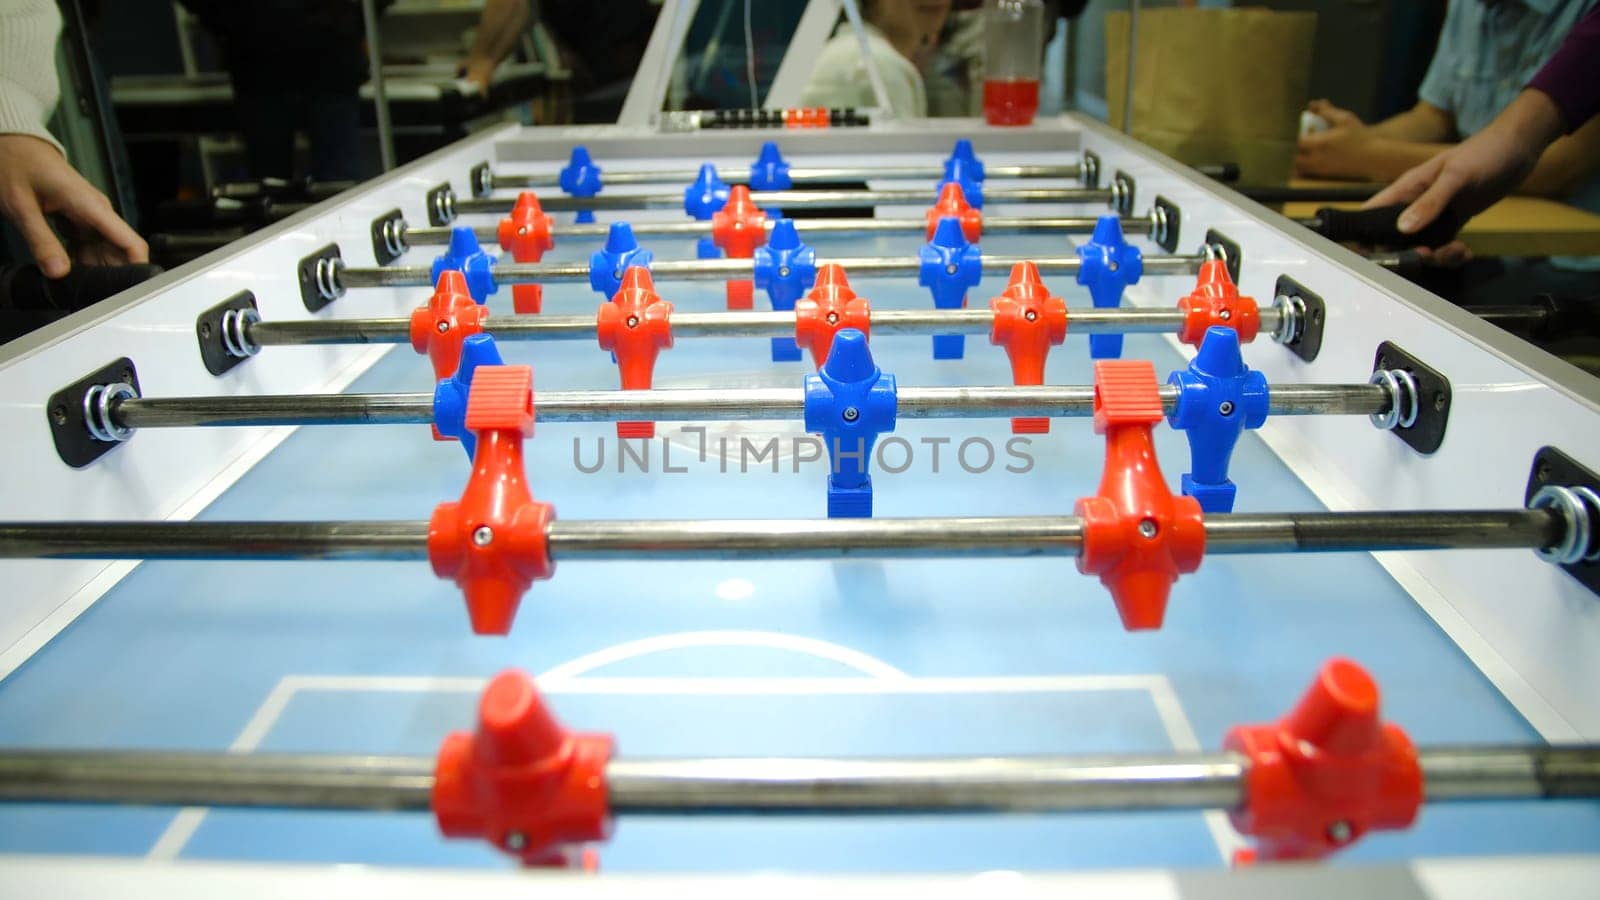 Table football soccer game kicker . Table football game, Soccer table with red and blue players. Young friends playing table football together indoors by Mediawhalestock